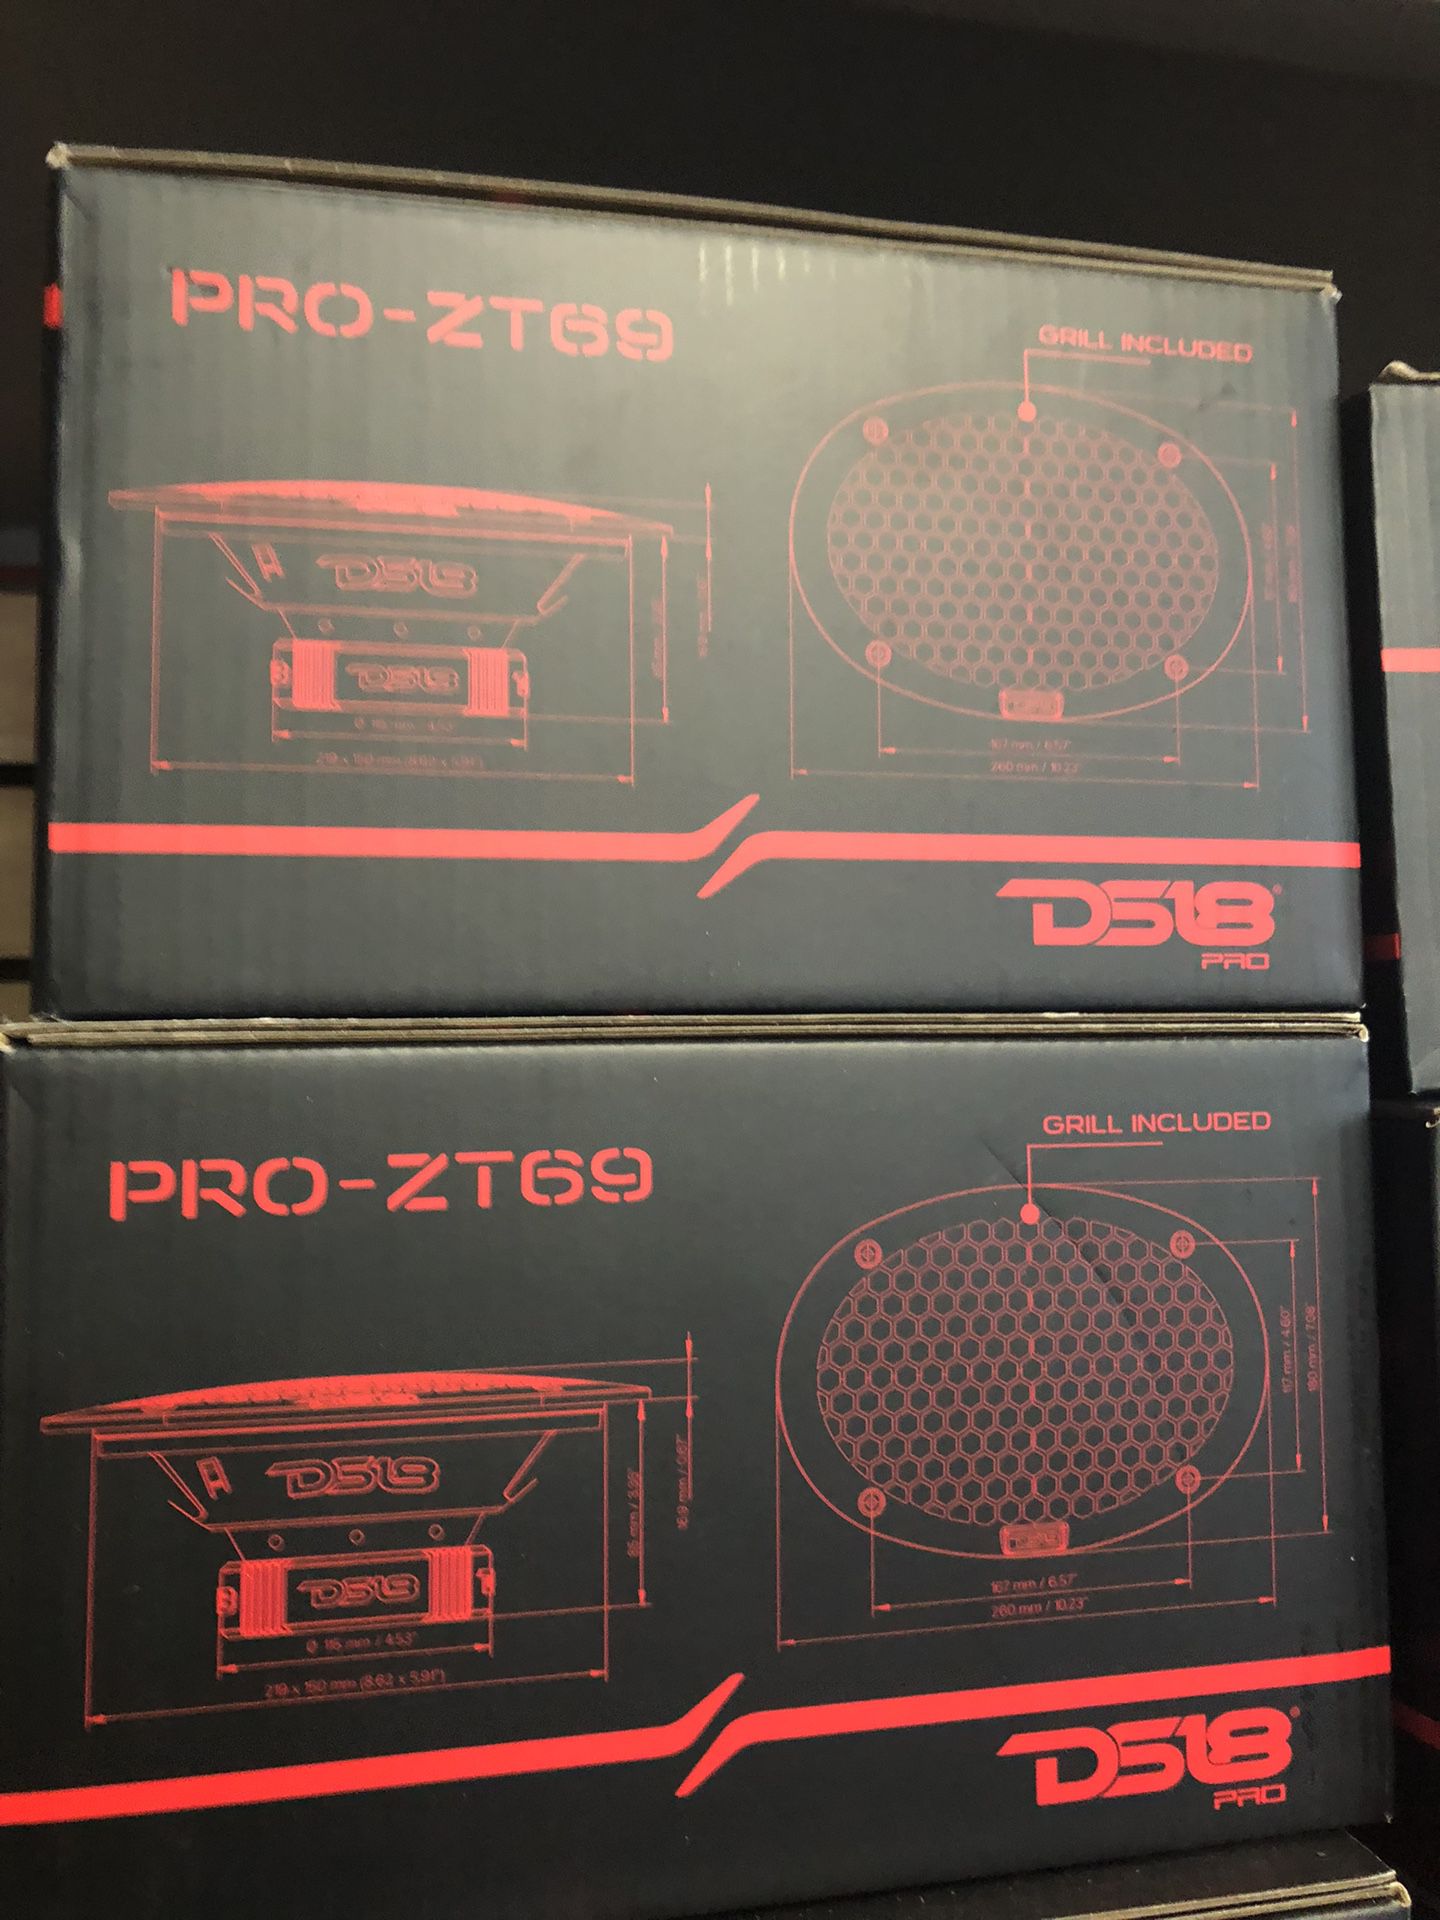 Ds18 Pro-zt69 On Sale Today For 84.99